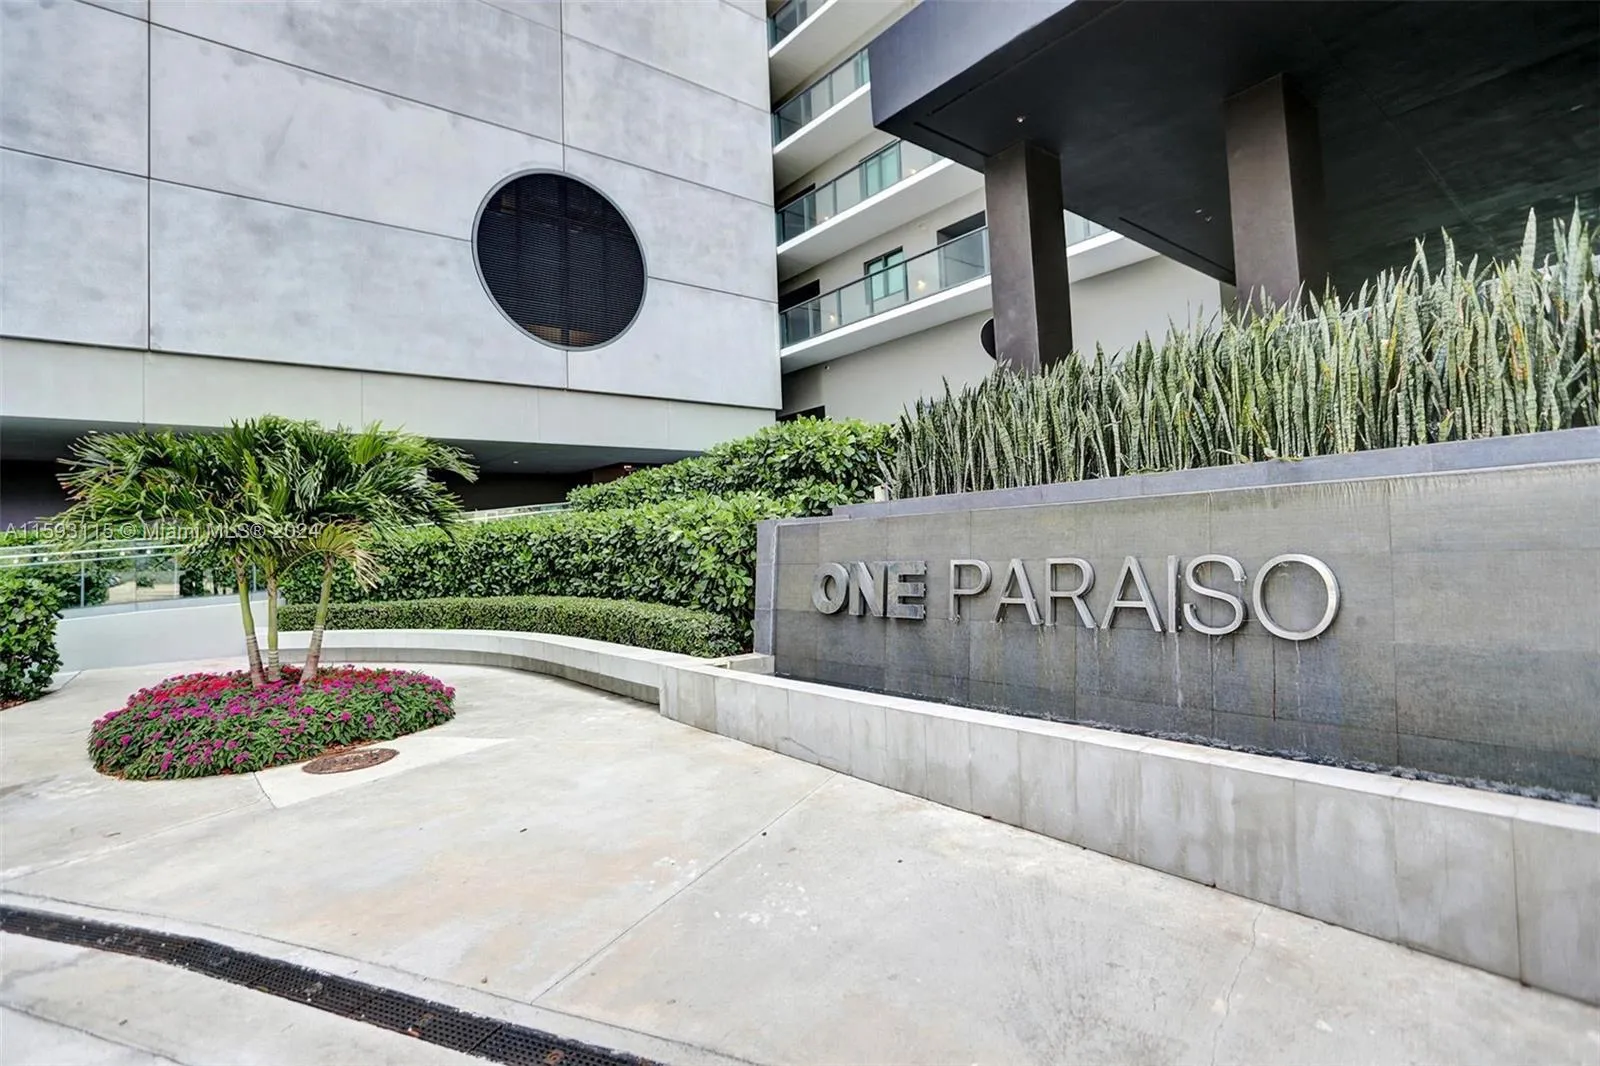 One Paraiso, a luxury condo in the Heart of Edgewater